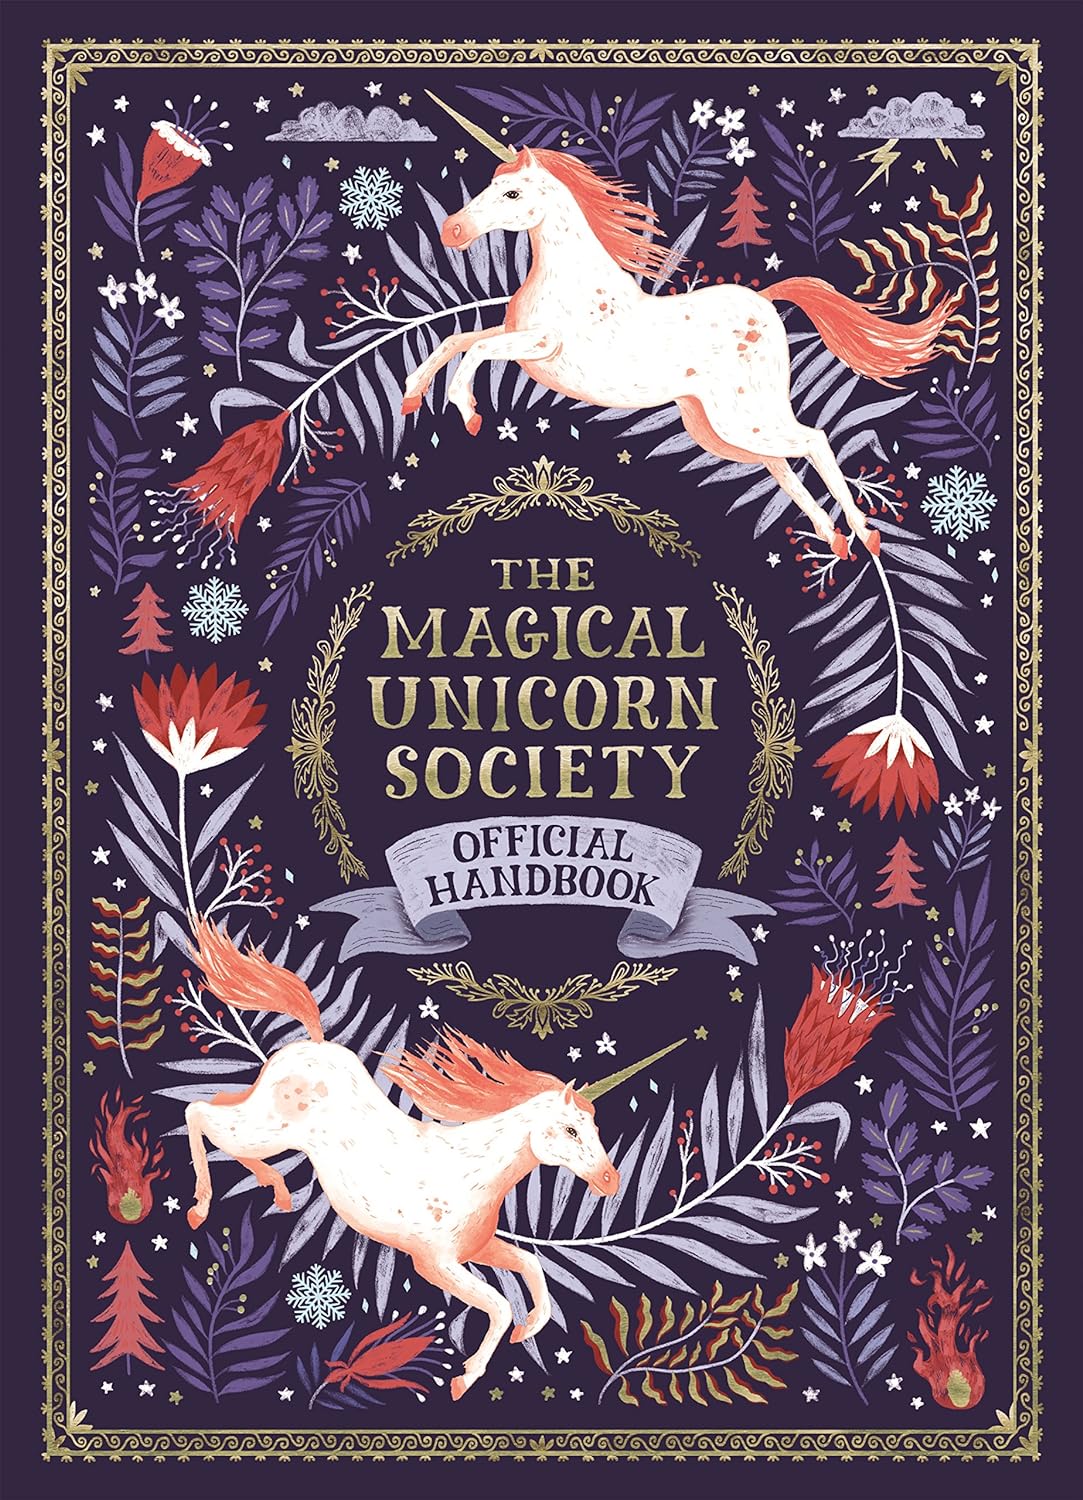 Selwyn E. Phipps: The Magical Unicorn Society Official Handbook, illustrated by Harry and Zanna Goldhawk and Helen Dardik